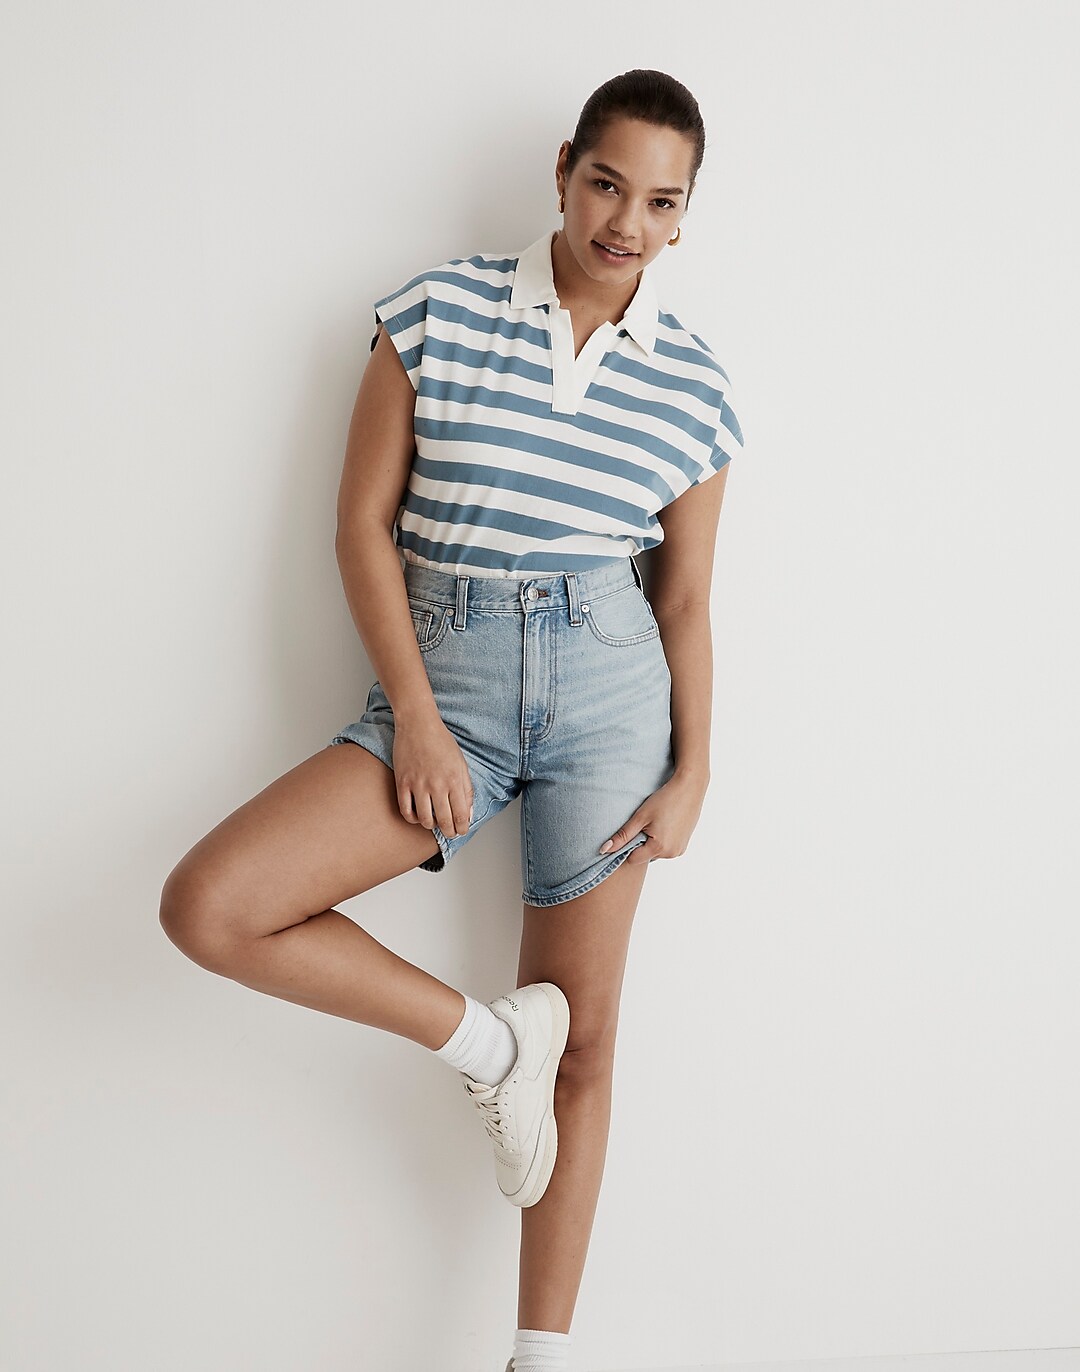 Relaxed Polo Tee in Stripe